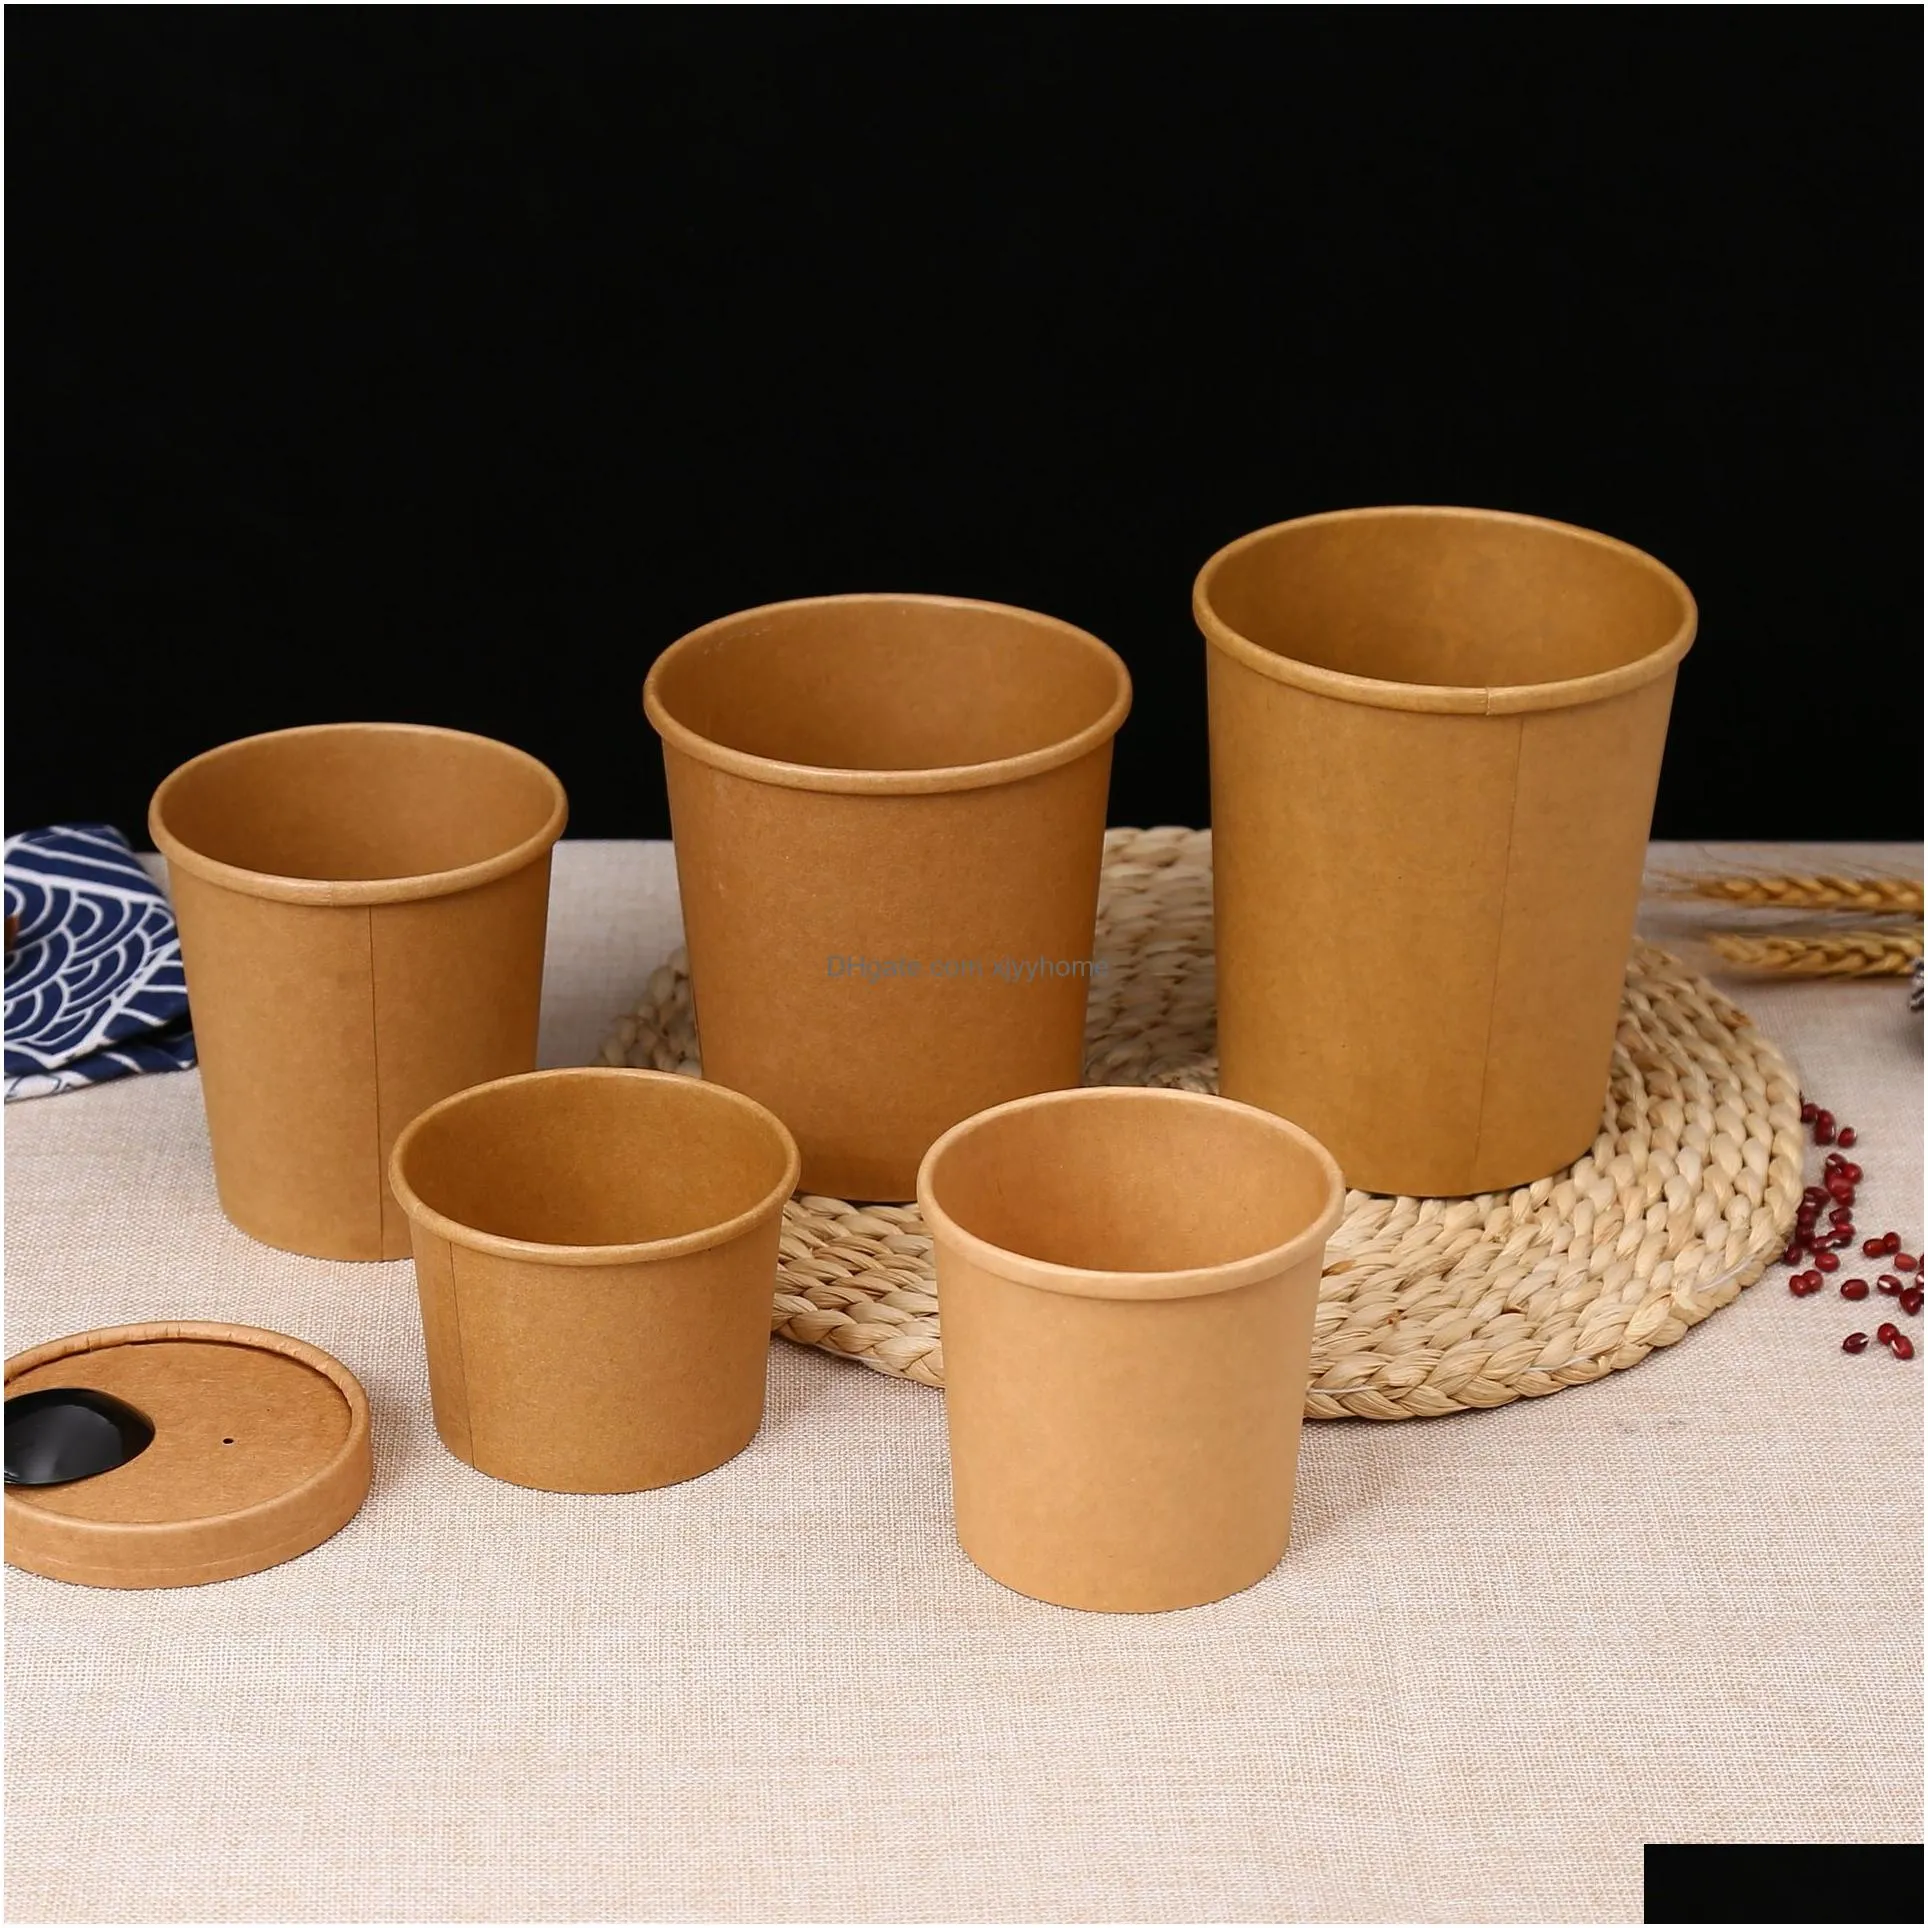 Disposable Take Out Containers Kraft Paper Cups Soup Bowls Containers Ice Cream Food Disposable Dessert Cup With Lids Drop Delivery Ho Dh4Na